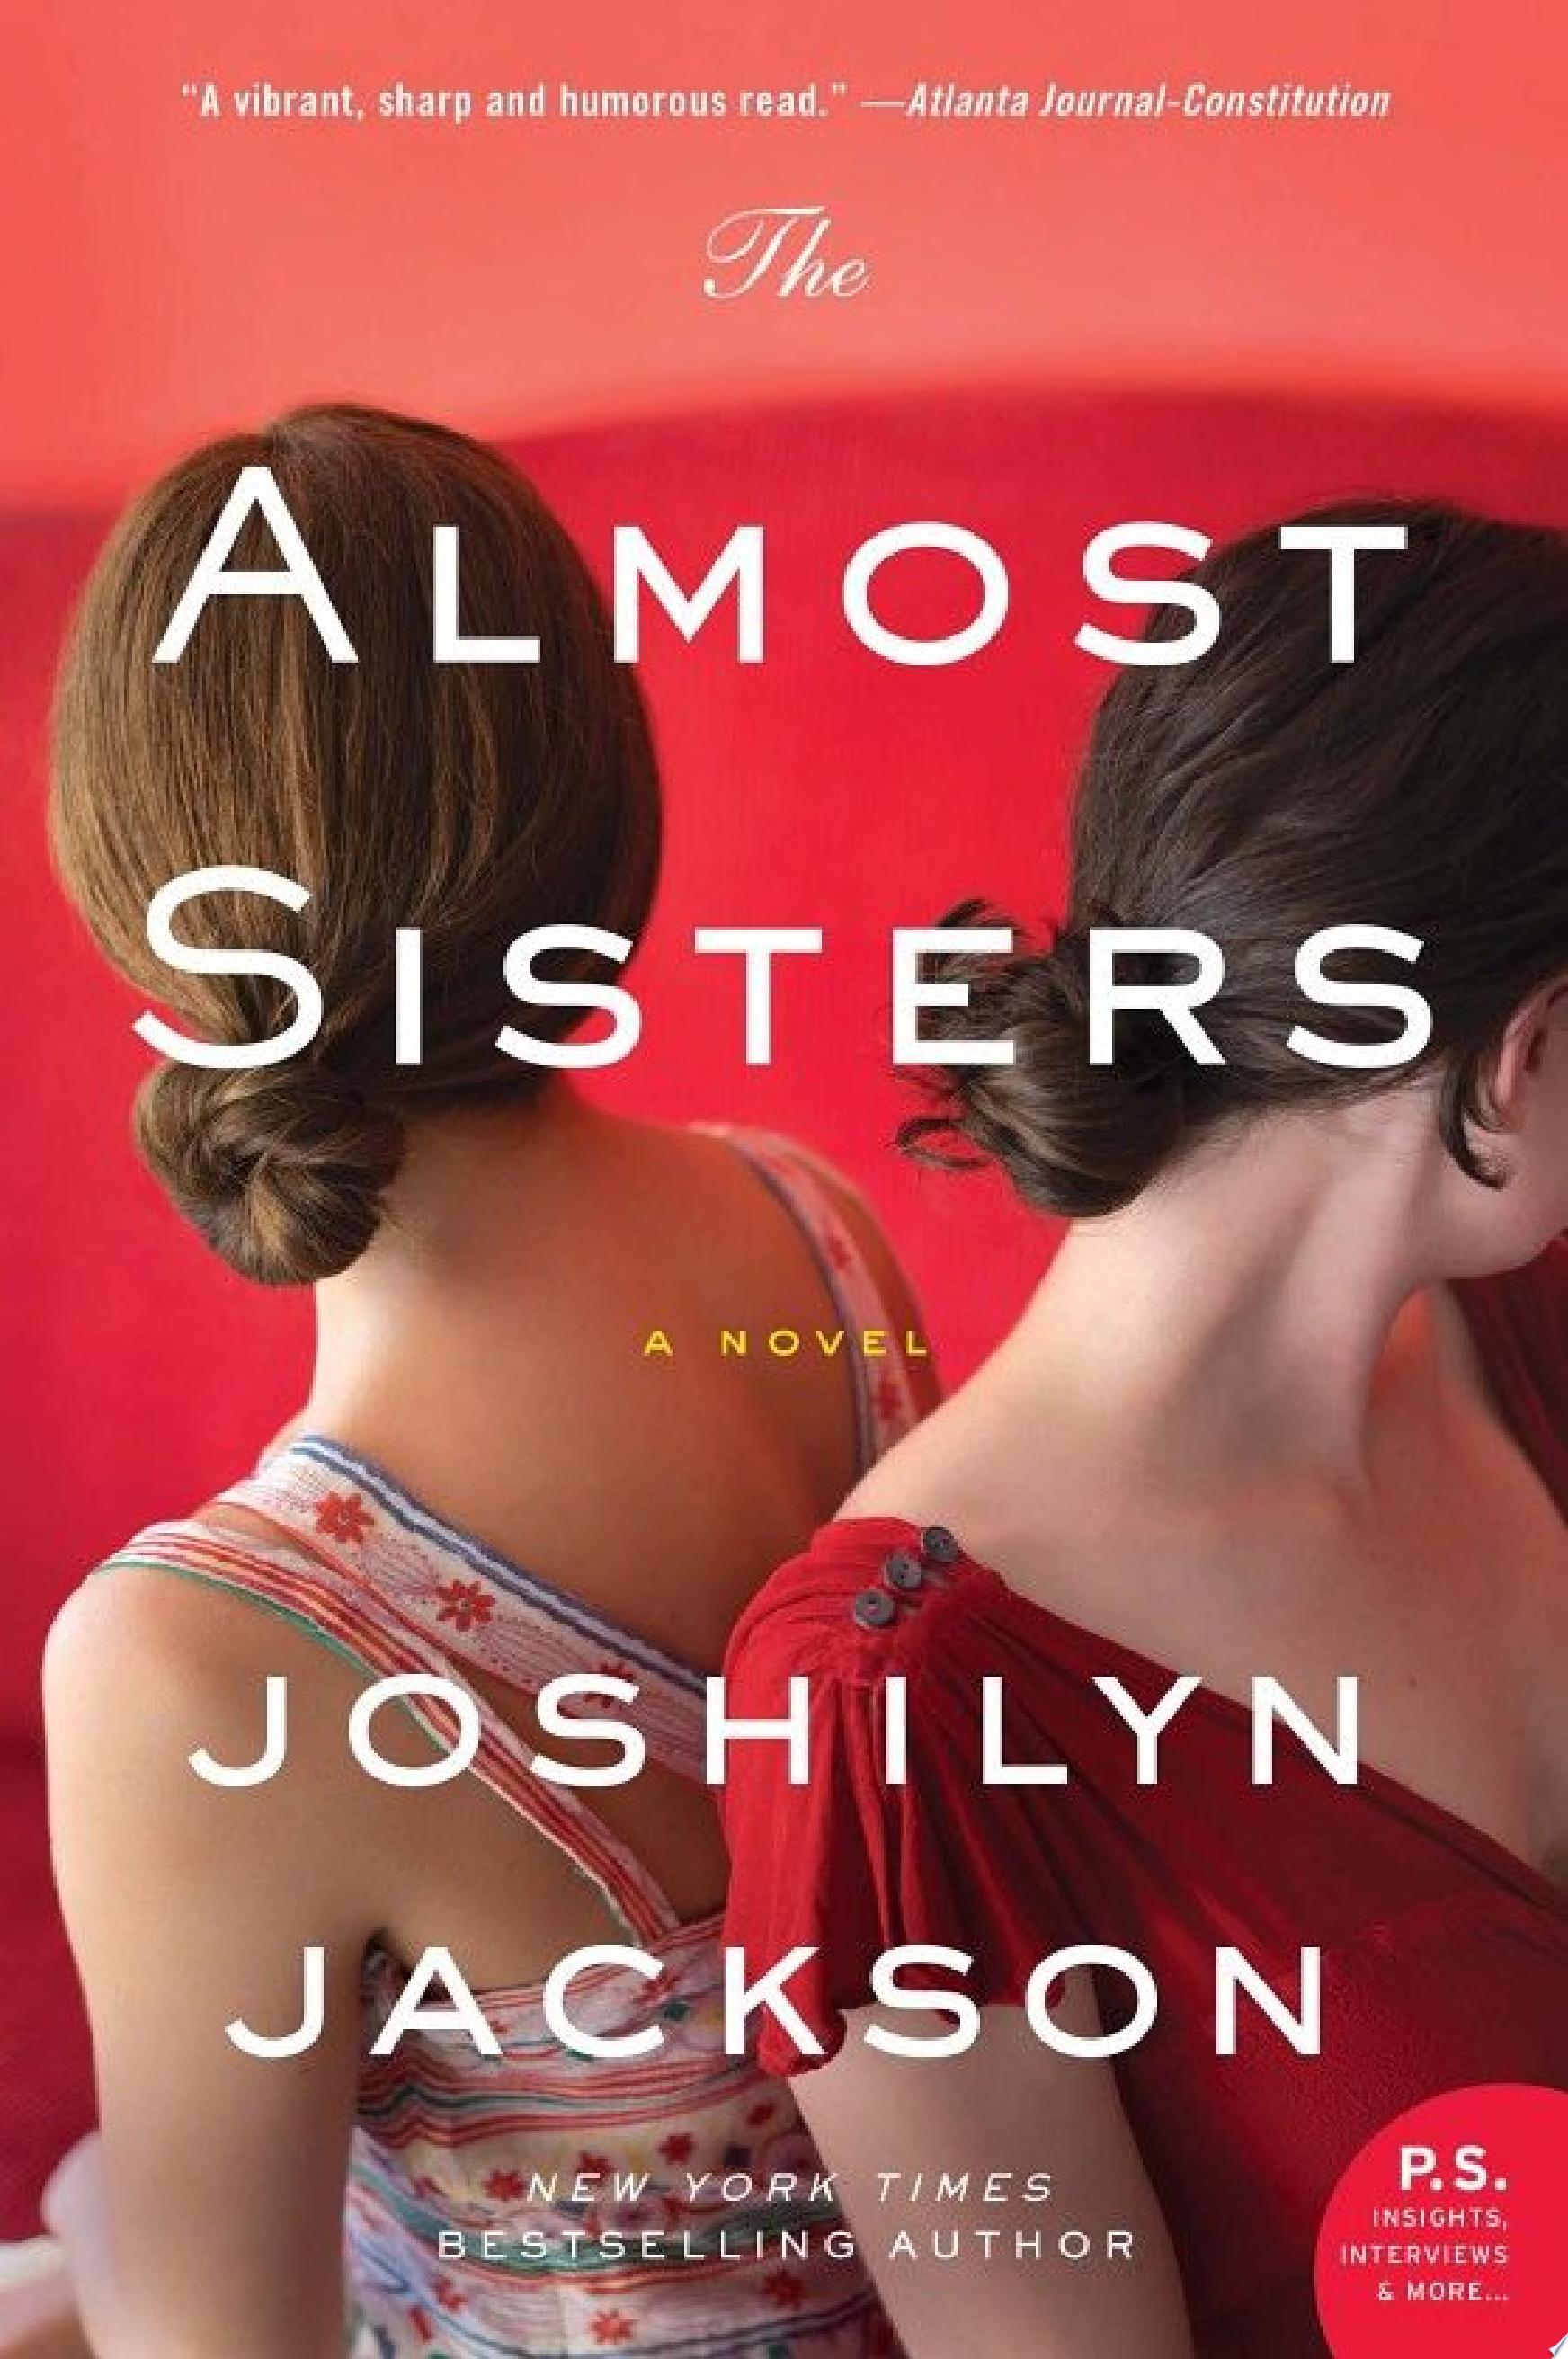 Image for "The Almost Sisters"